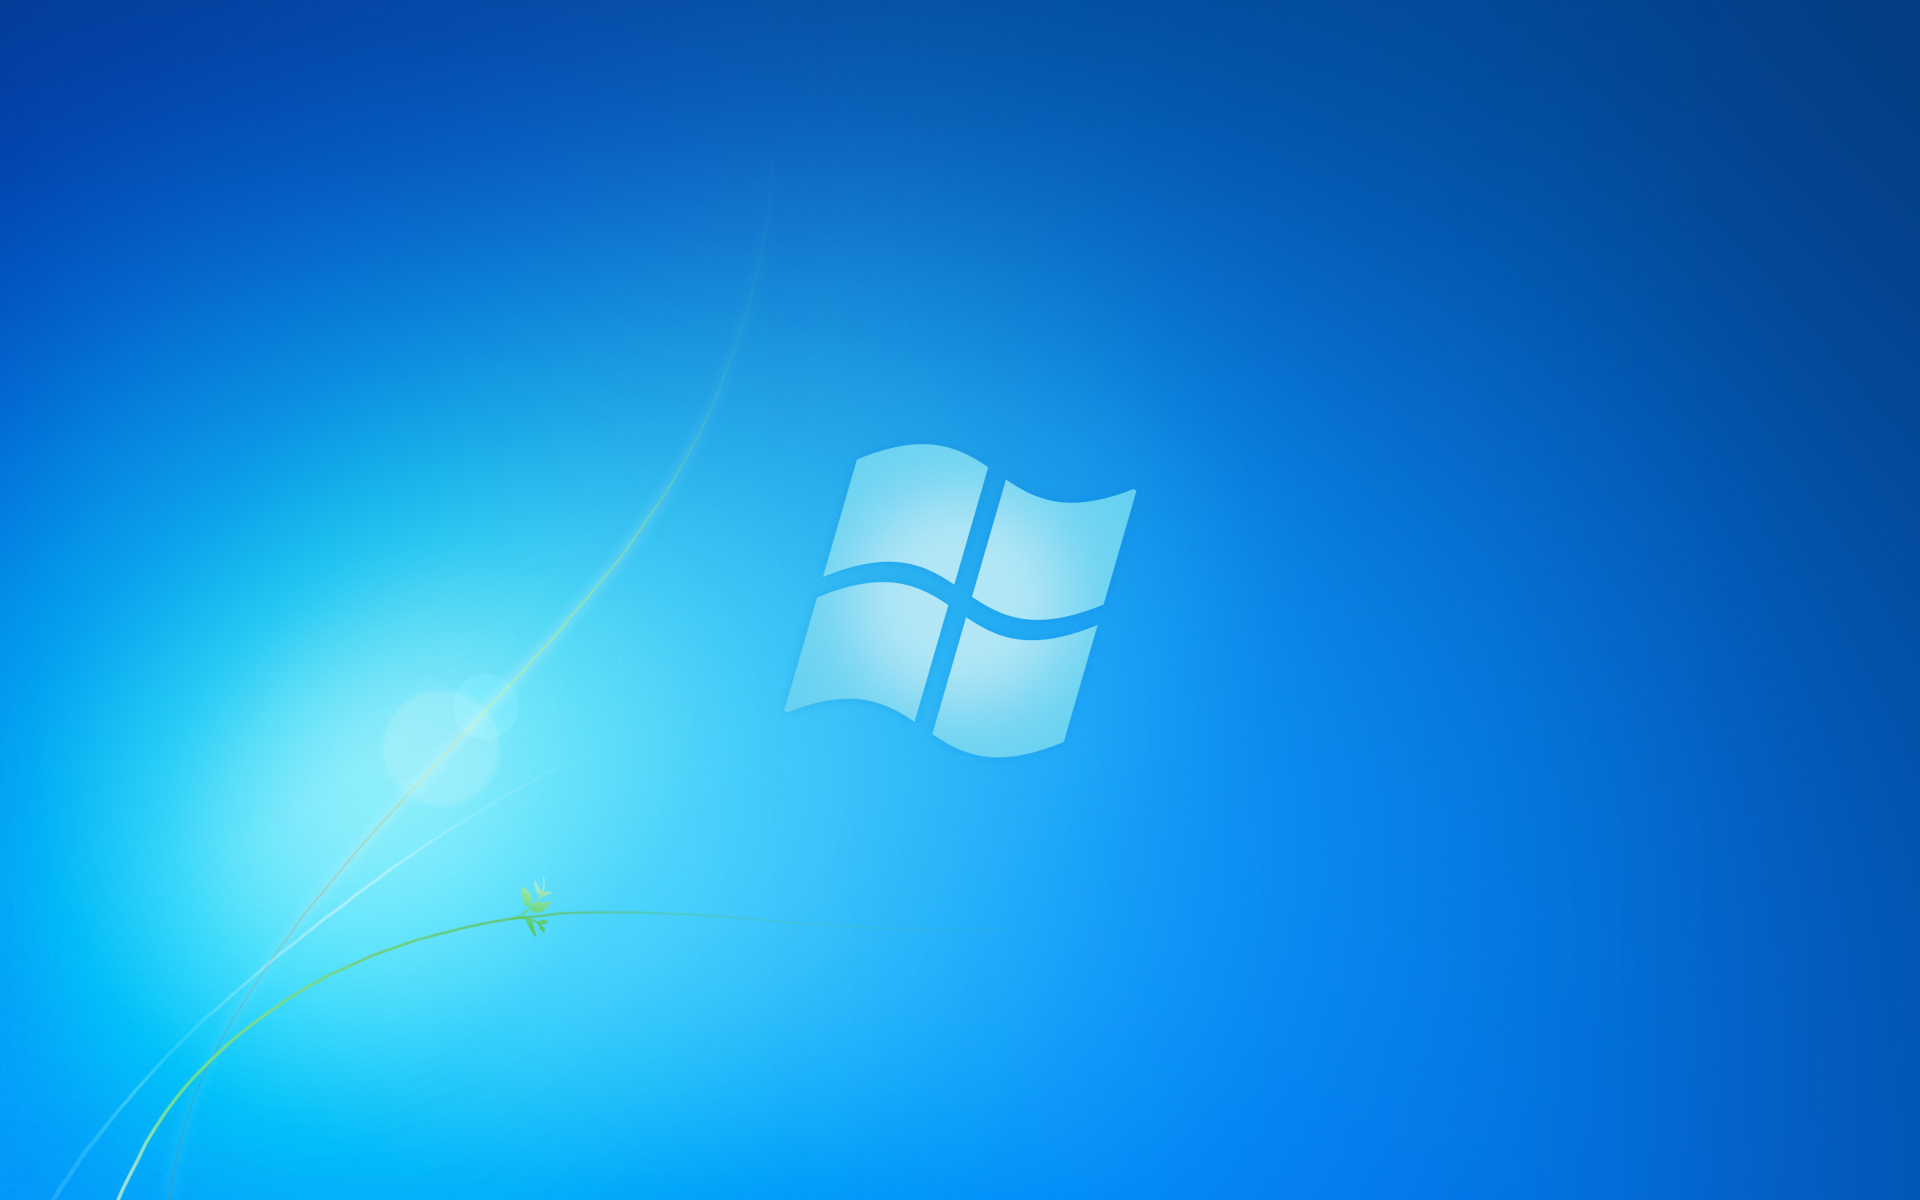 Windows 7 Operating Systems Microsoft #9FWh